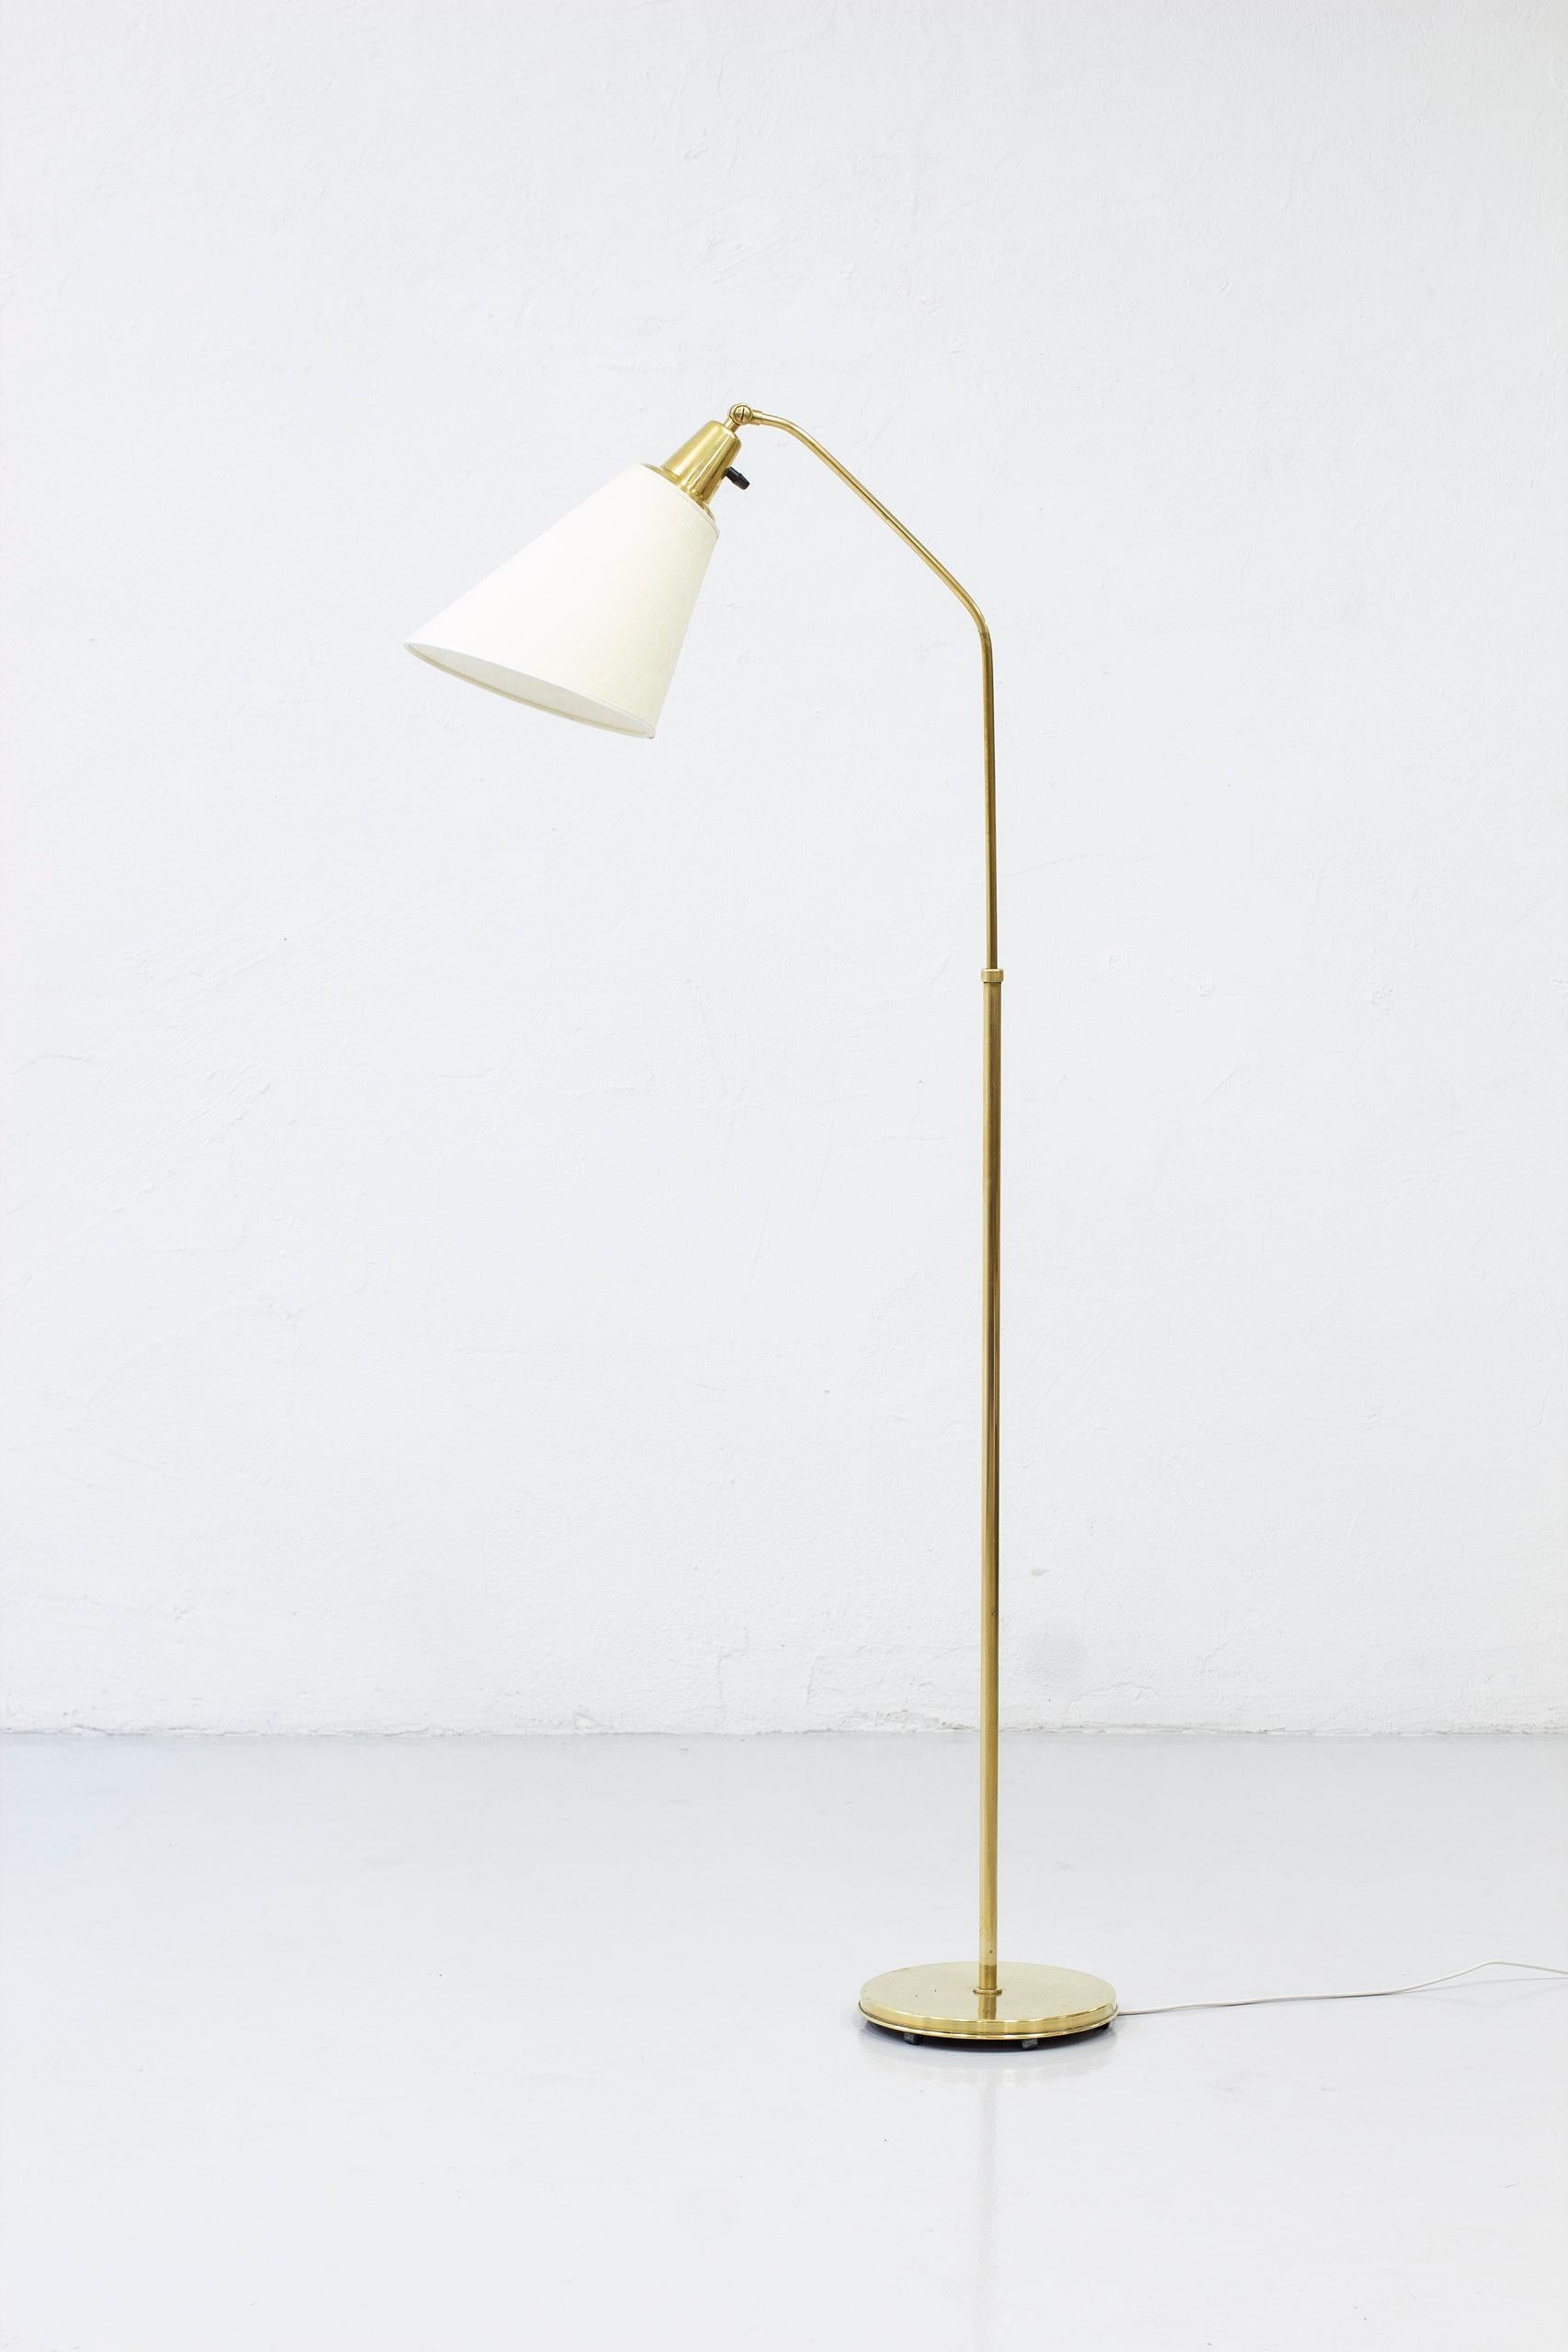 Floor lamp designed by Alf Svensson. Early Bergboms production made in Sweden, designed in the late 1940s. Made from polished brass with a new fabric lamp shade in creme white. Original light switch in bakelite in working order. Good vintage